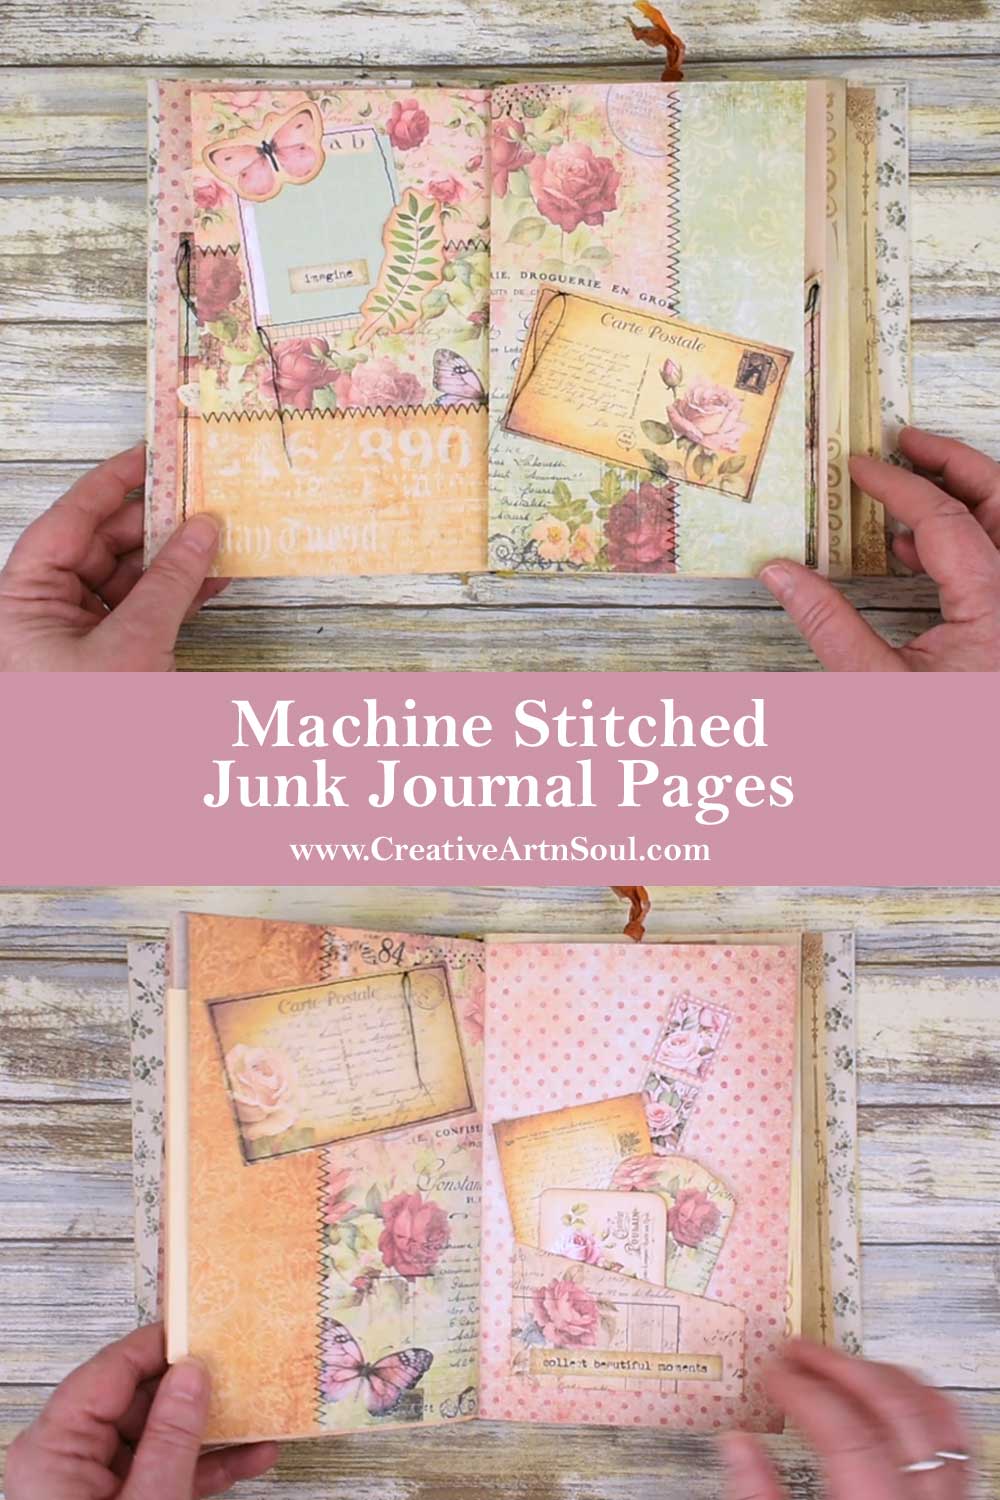 How to Make Stitched Junk Journal Pages > Creative ArtnSoul